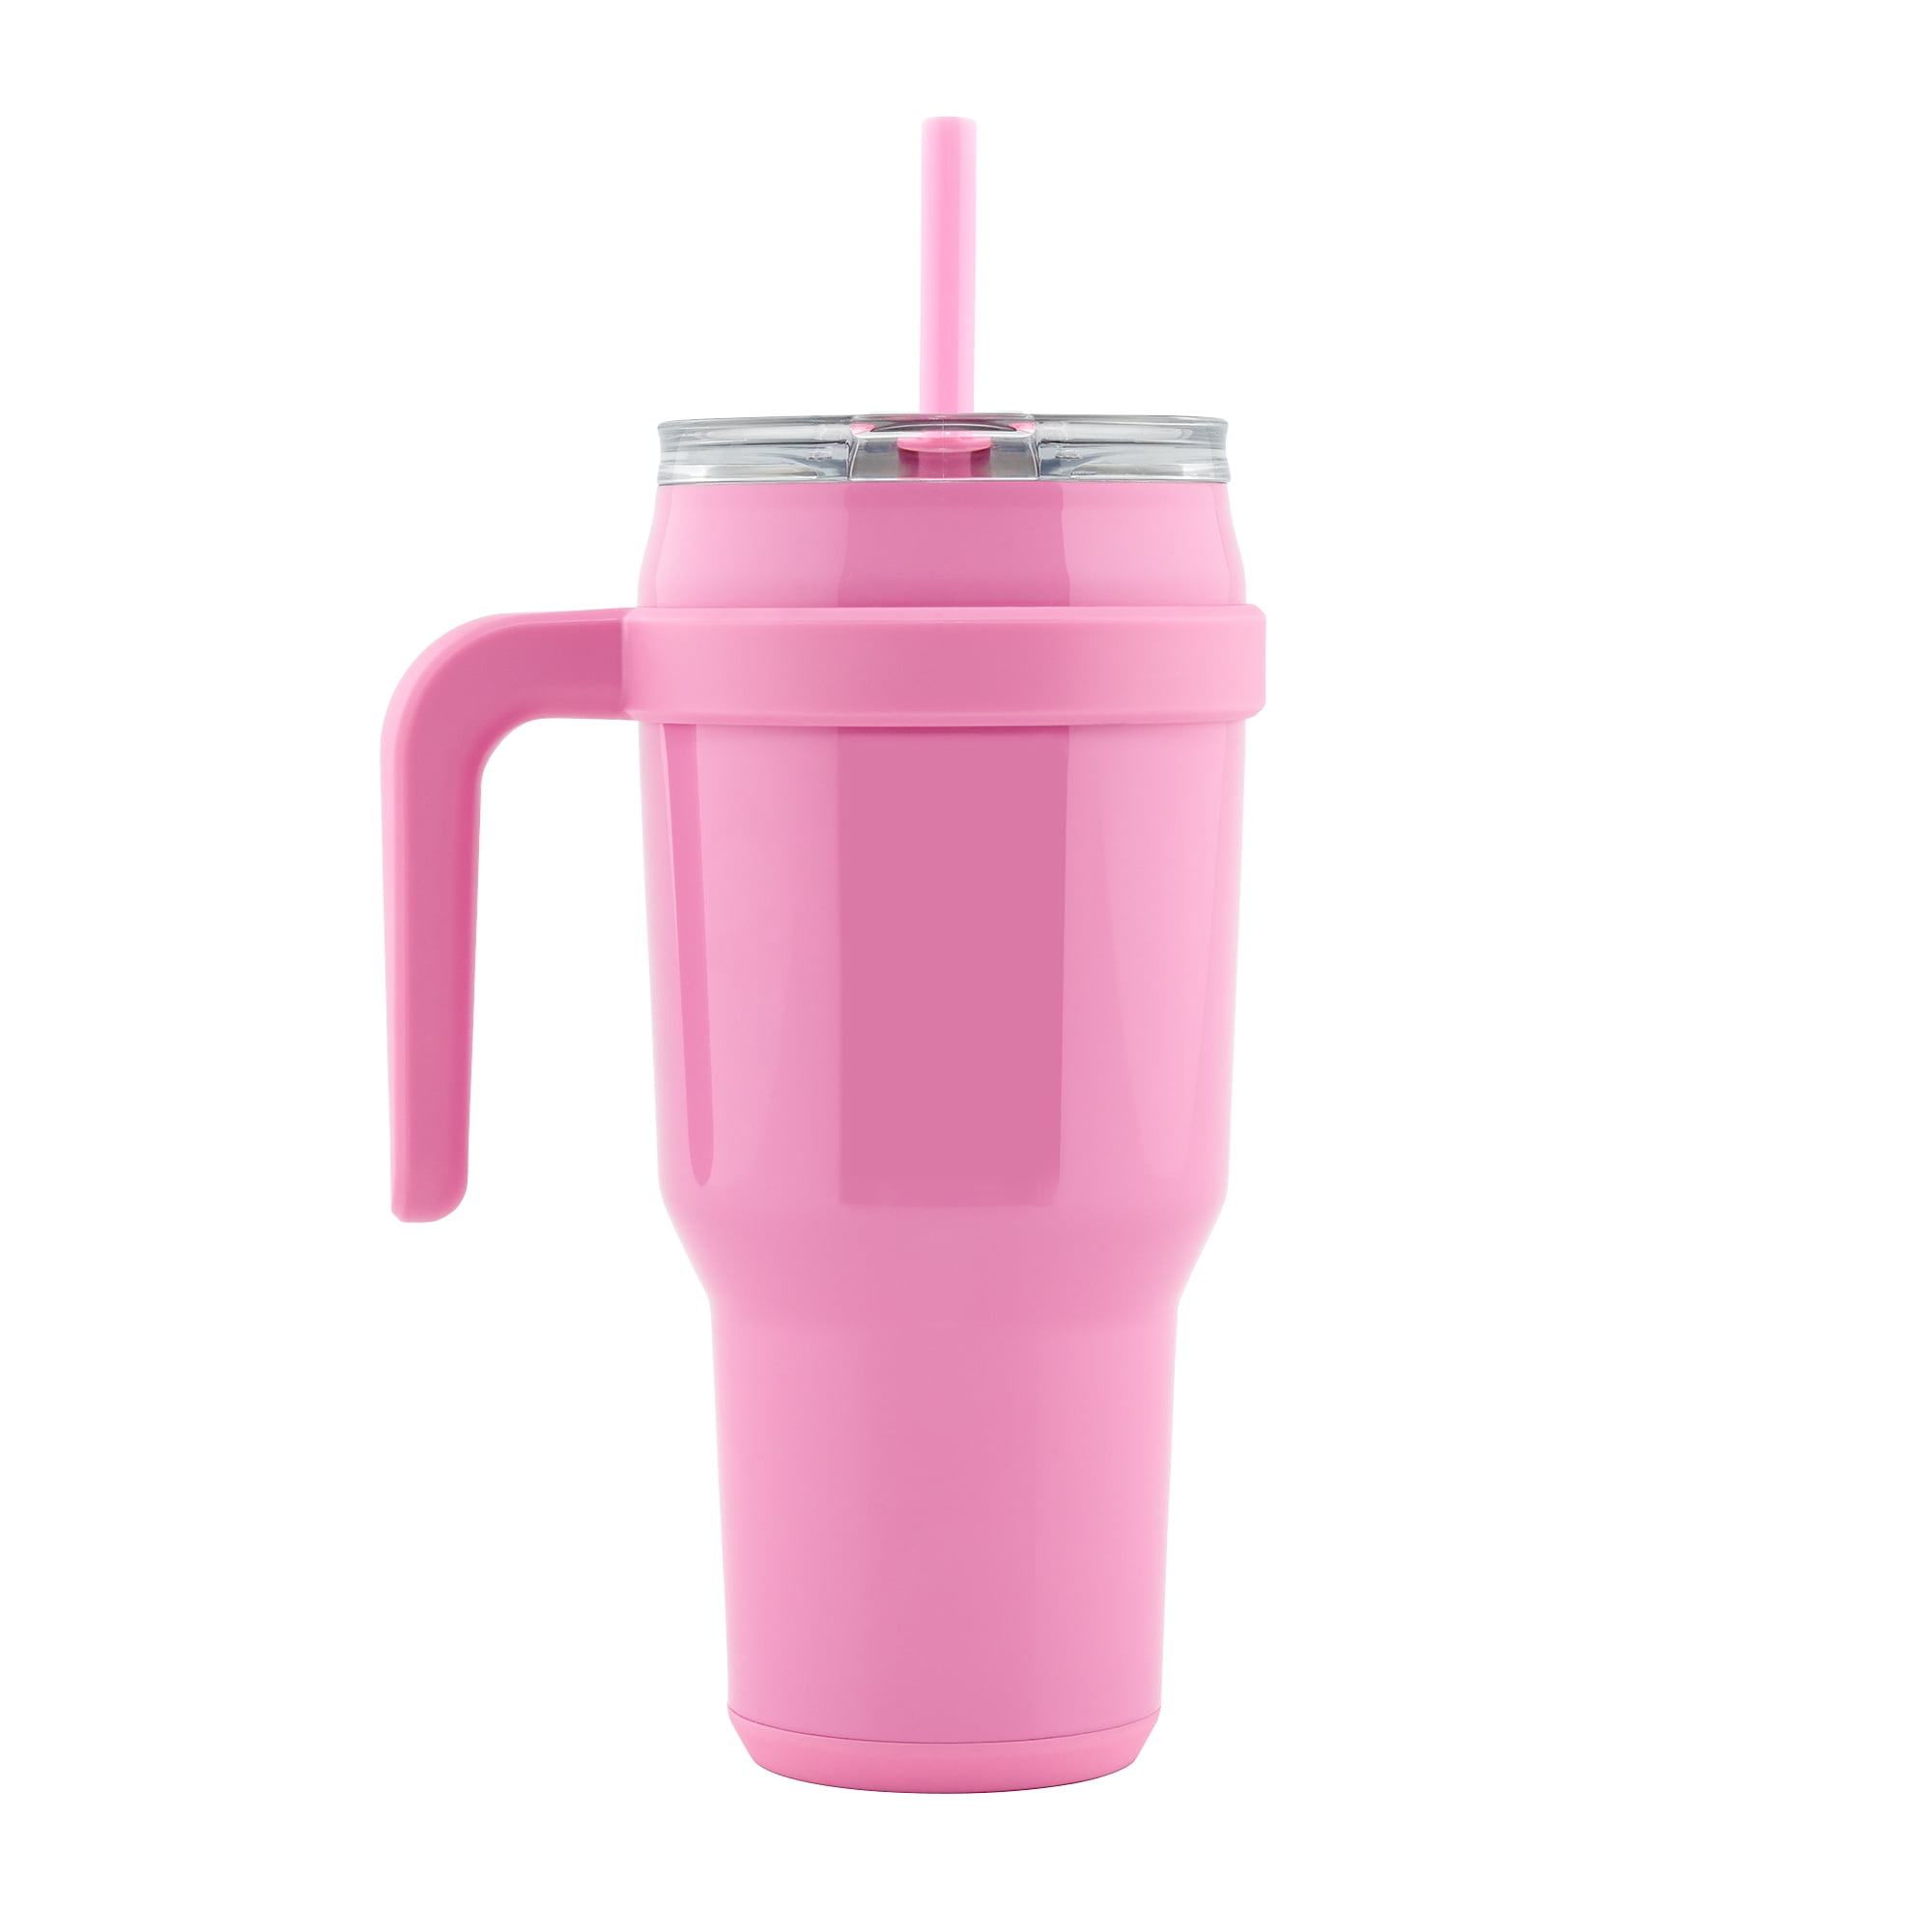 Sivio 40 oz Tumbler with Handle and Straw Lid Stainless Steel Insulated Tumblers Travel Mug for Hot and Cold Beverages,Pink, Size: 26.5